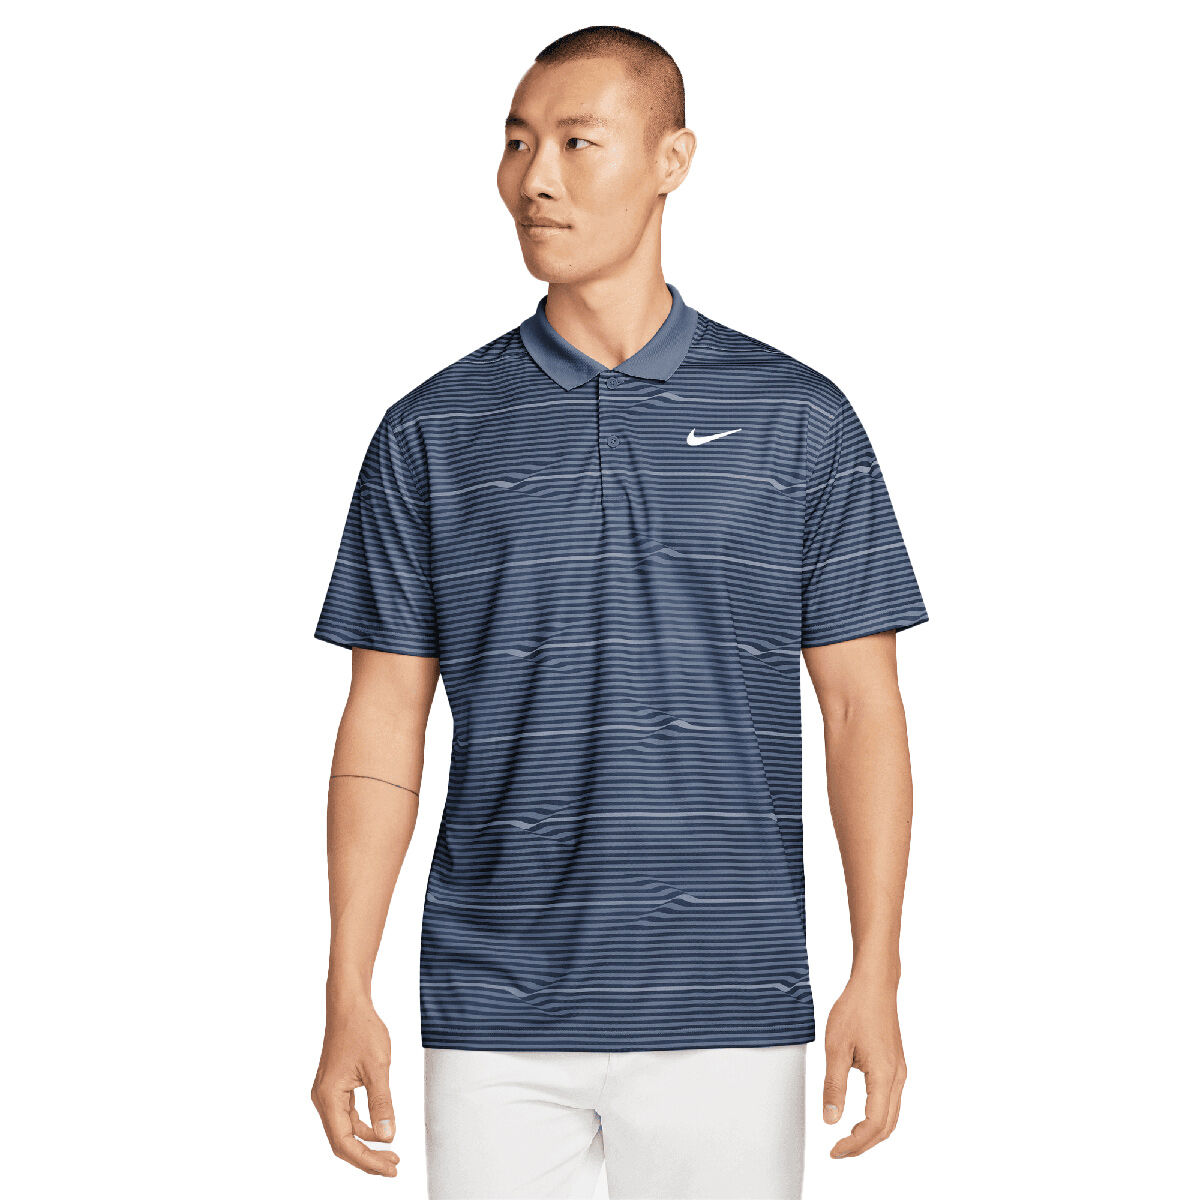 Nike Men’s Victory+ Ripple Golf Polo Shirt, Mens, Midnight navy/diffused blue/wh, Xxl | American Golf